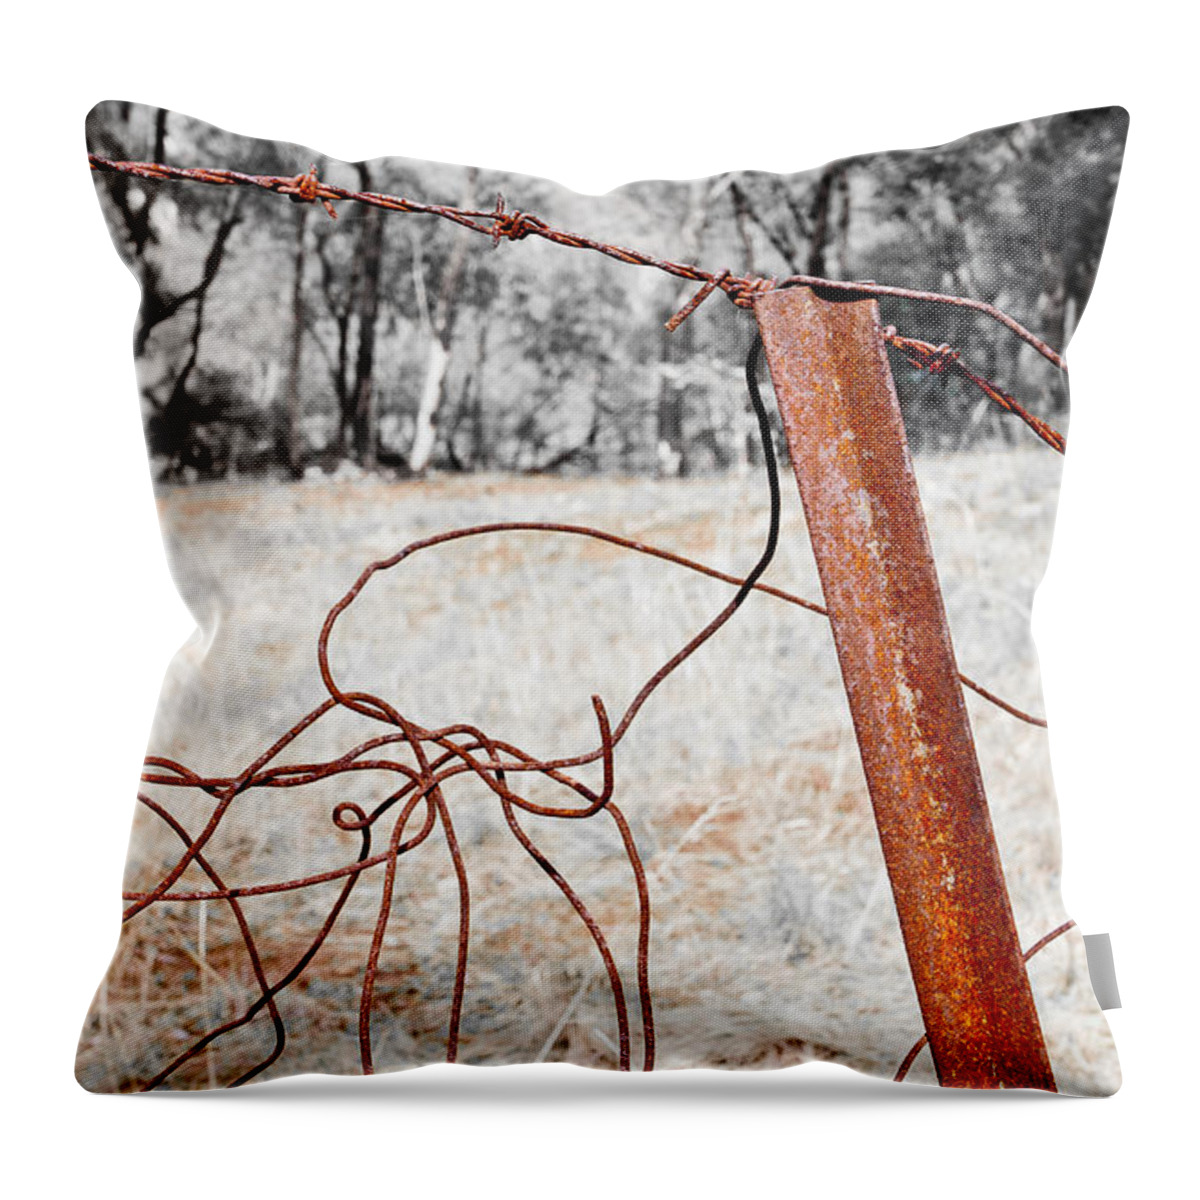 Australia Throw Pillow featuring the photograph Fence by Steven Ralser